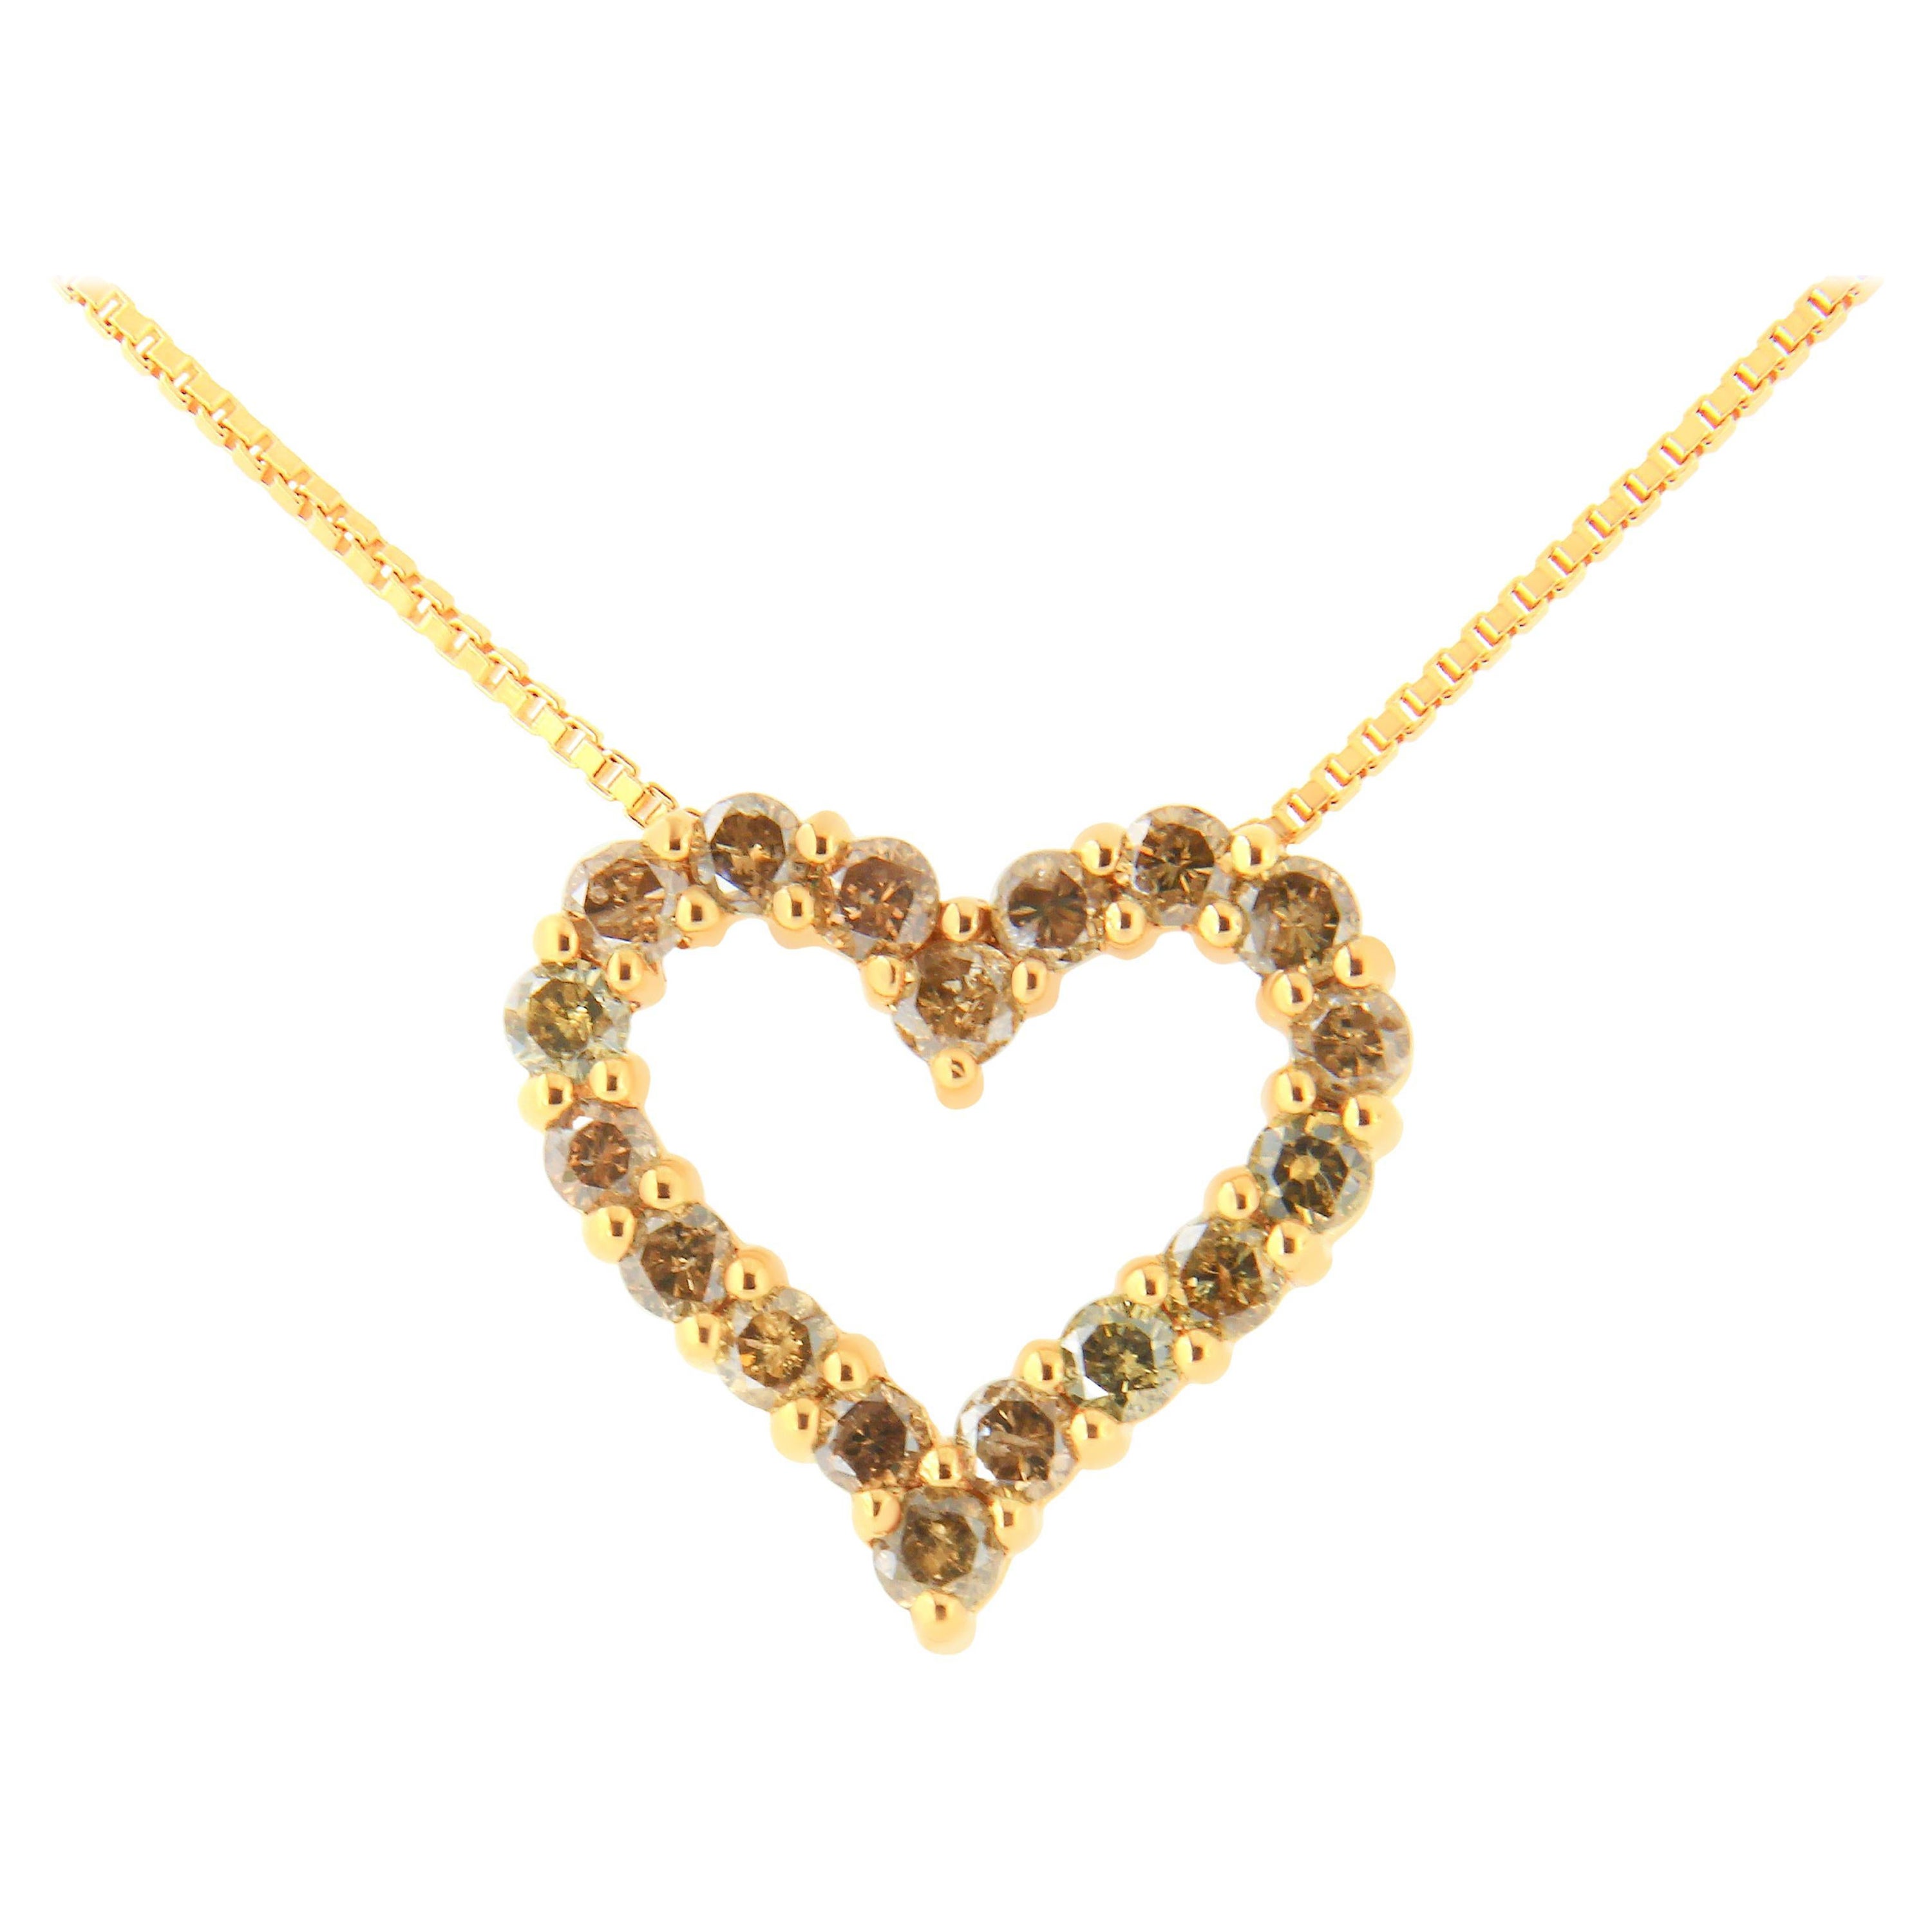 Yellow Gold Over Silver 1.0 Carat Champagne Diamond Heart Pendant Necklace